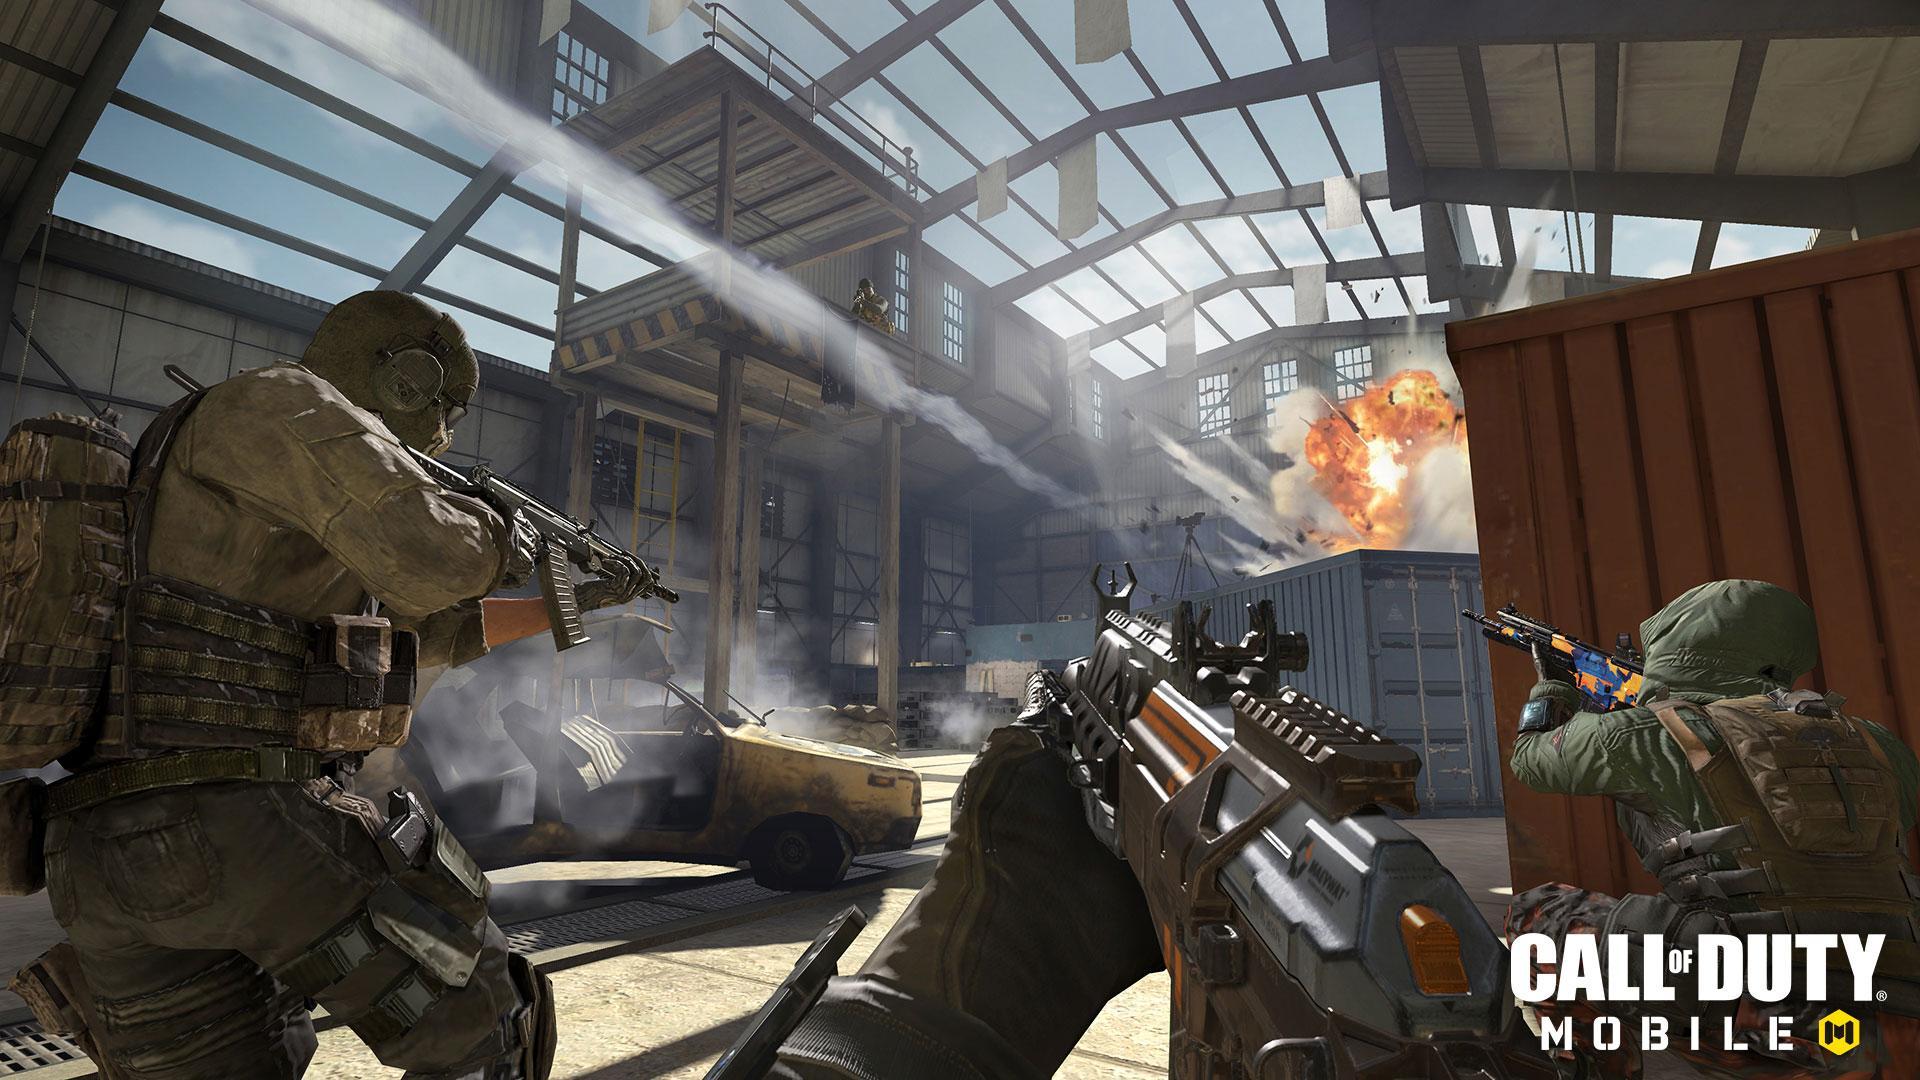 Call of Duty: Mobile Multiplayer Roles, by lawrietalks